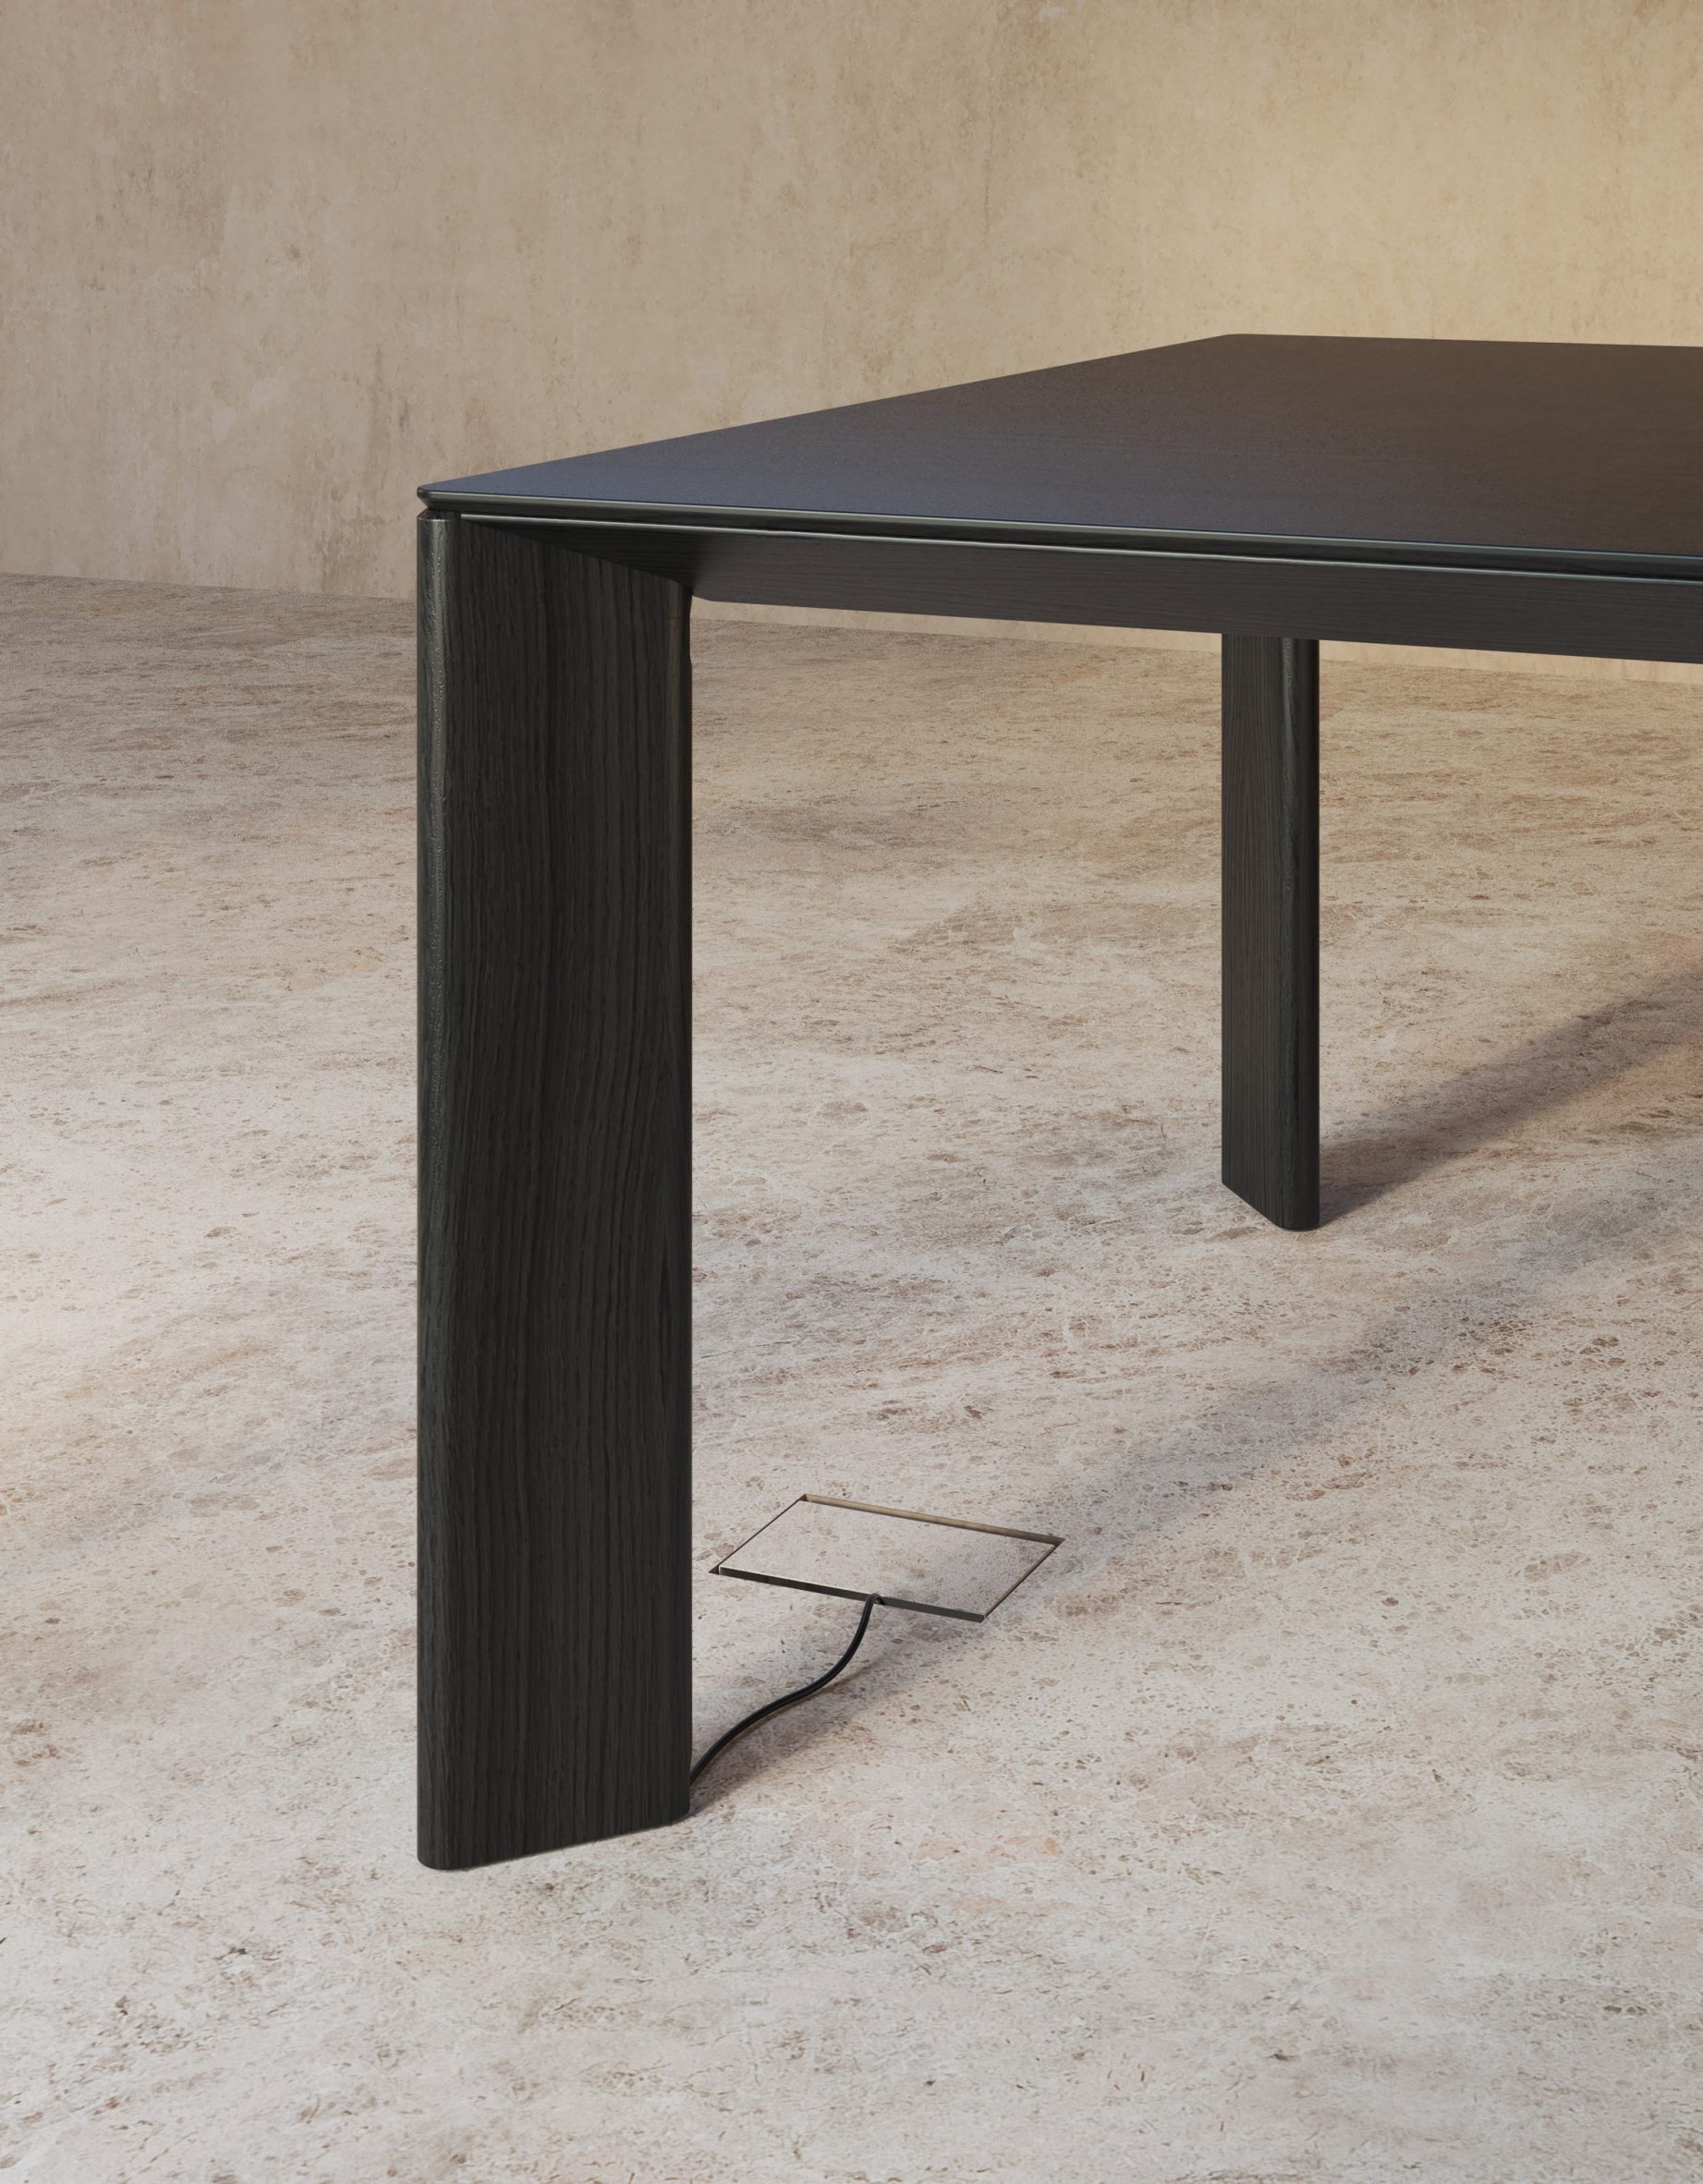 Black Foro table by Viccarbe